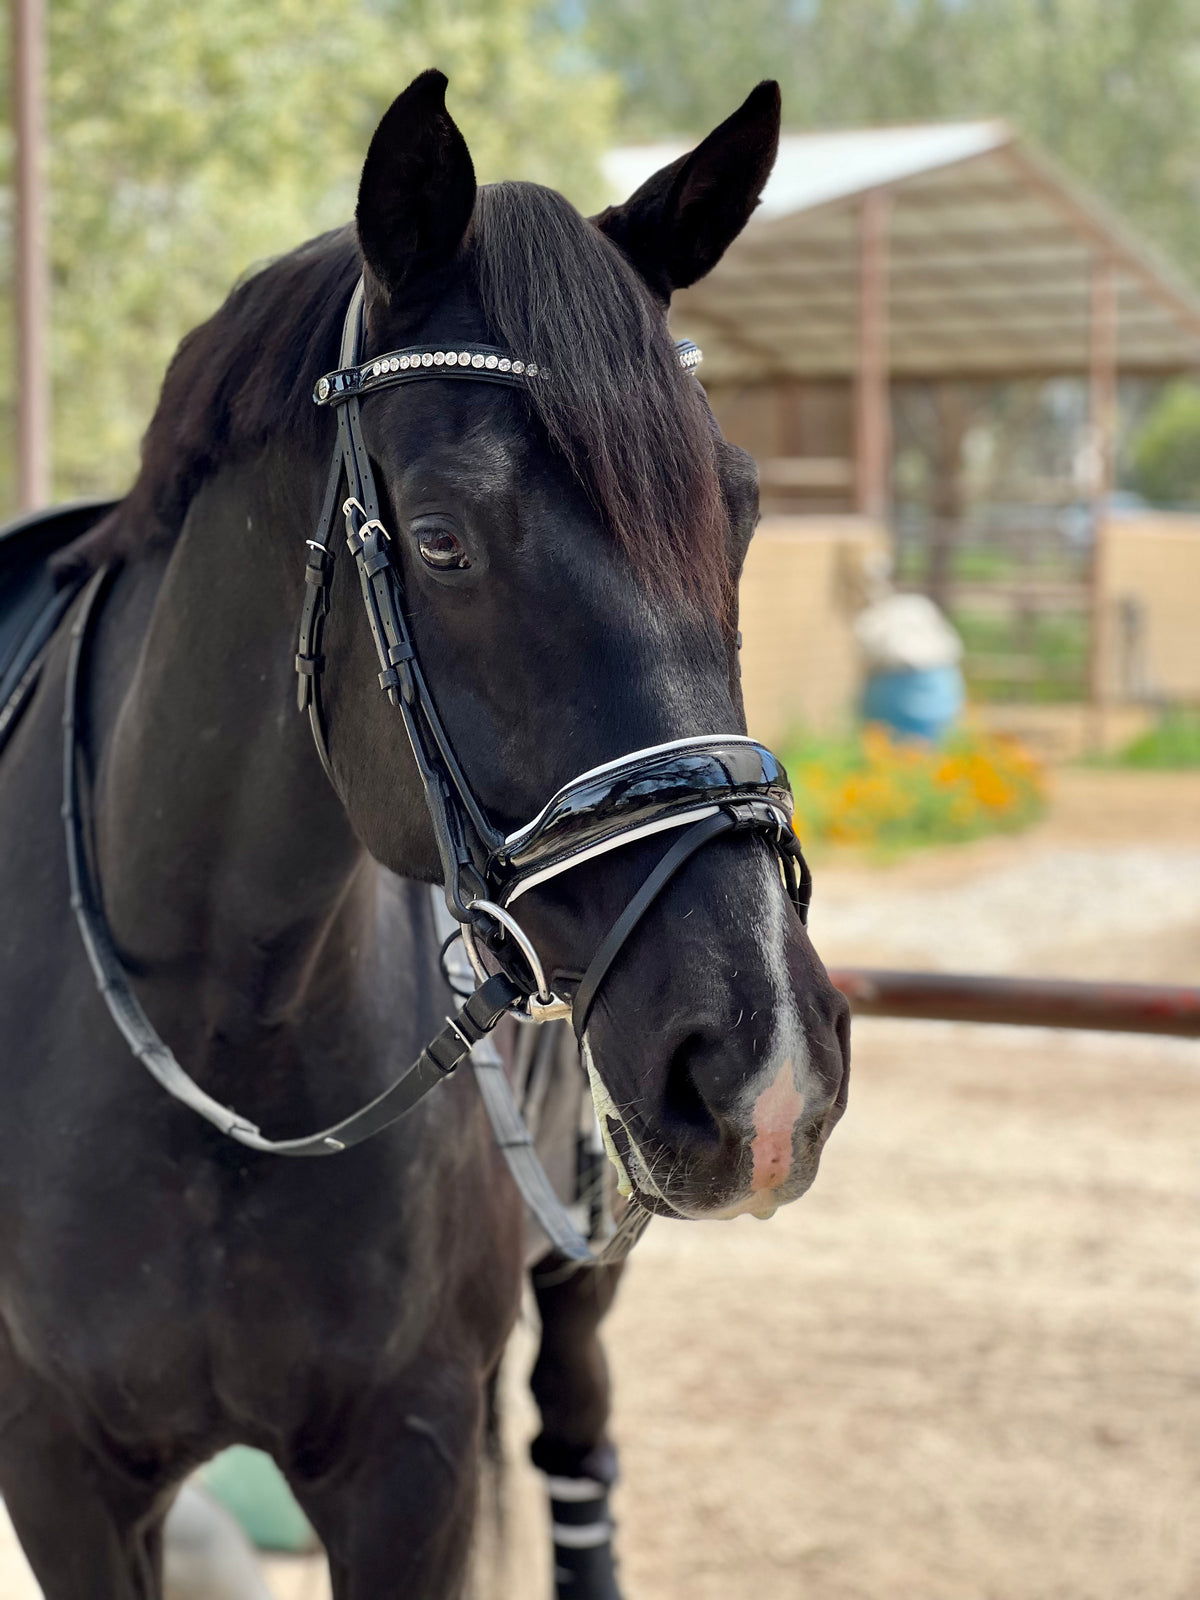 The Platinum - Rolled Black Patent &amp; White Padding Snaffle Bridle